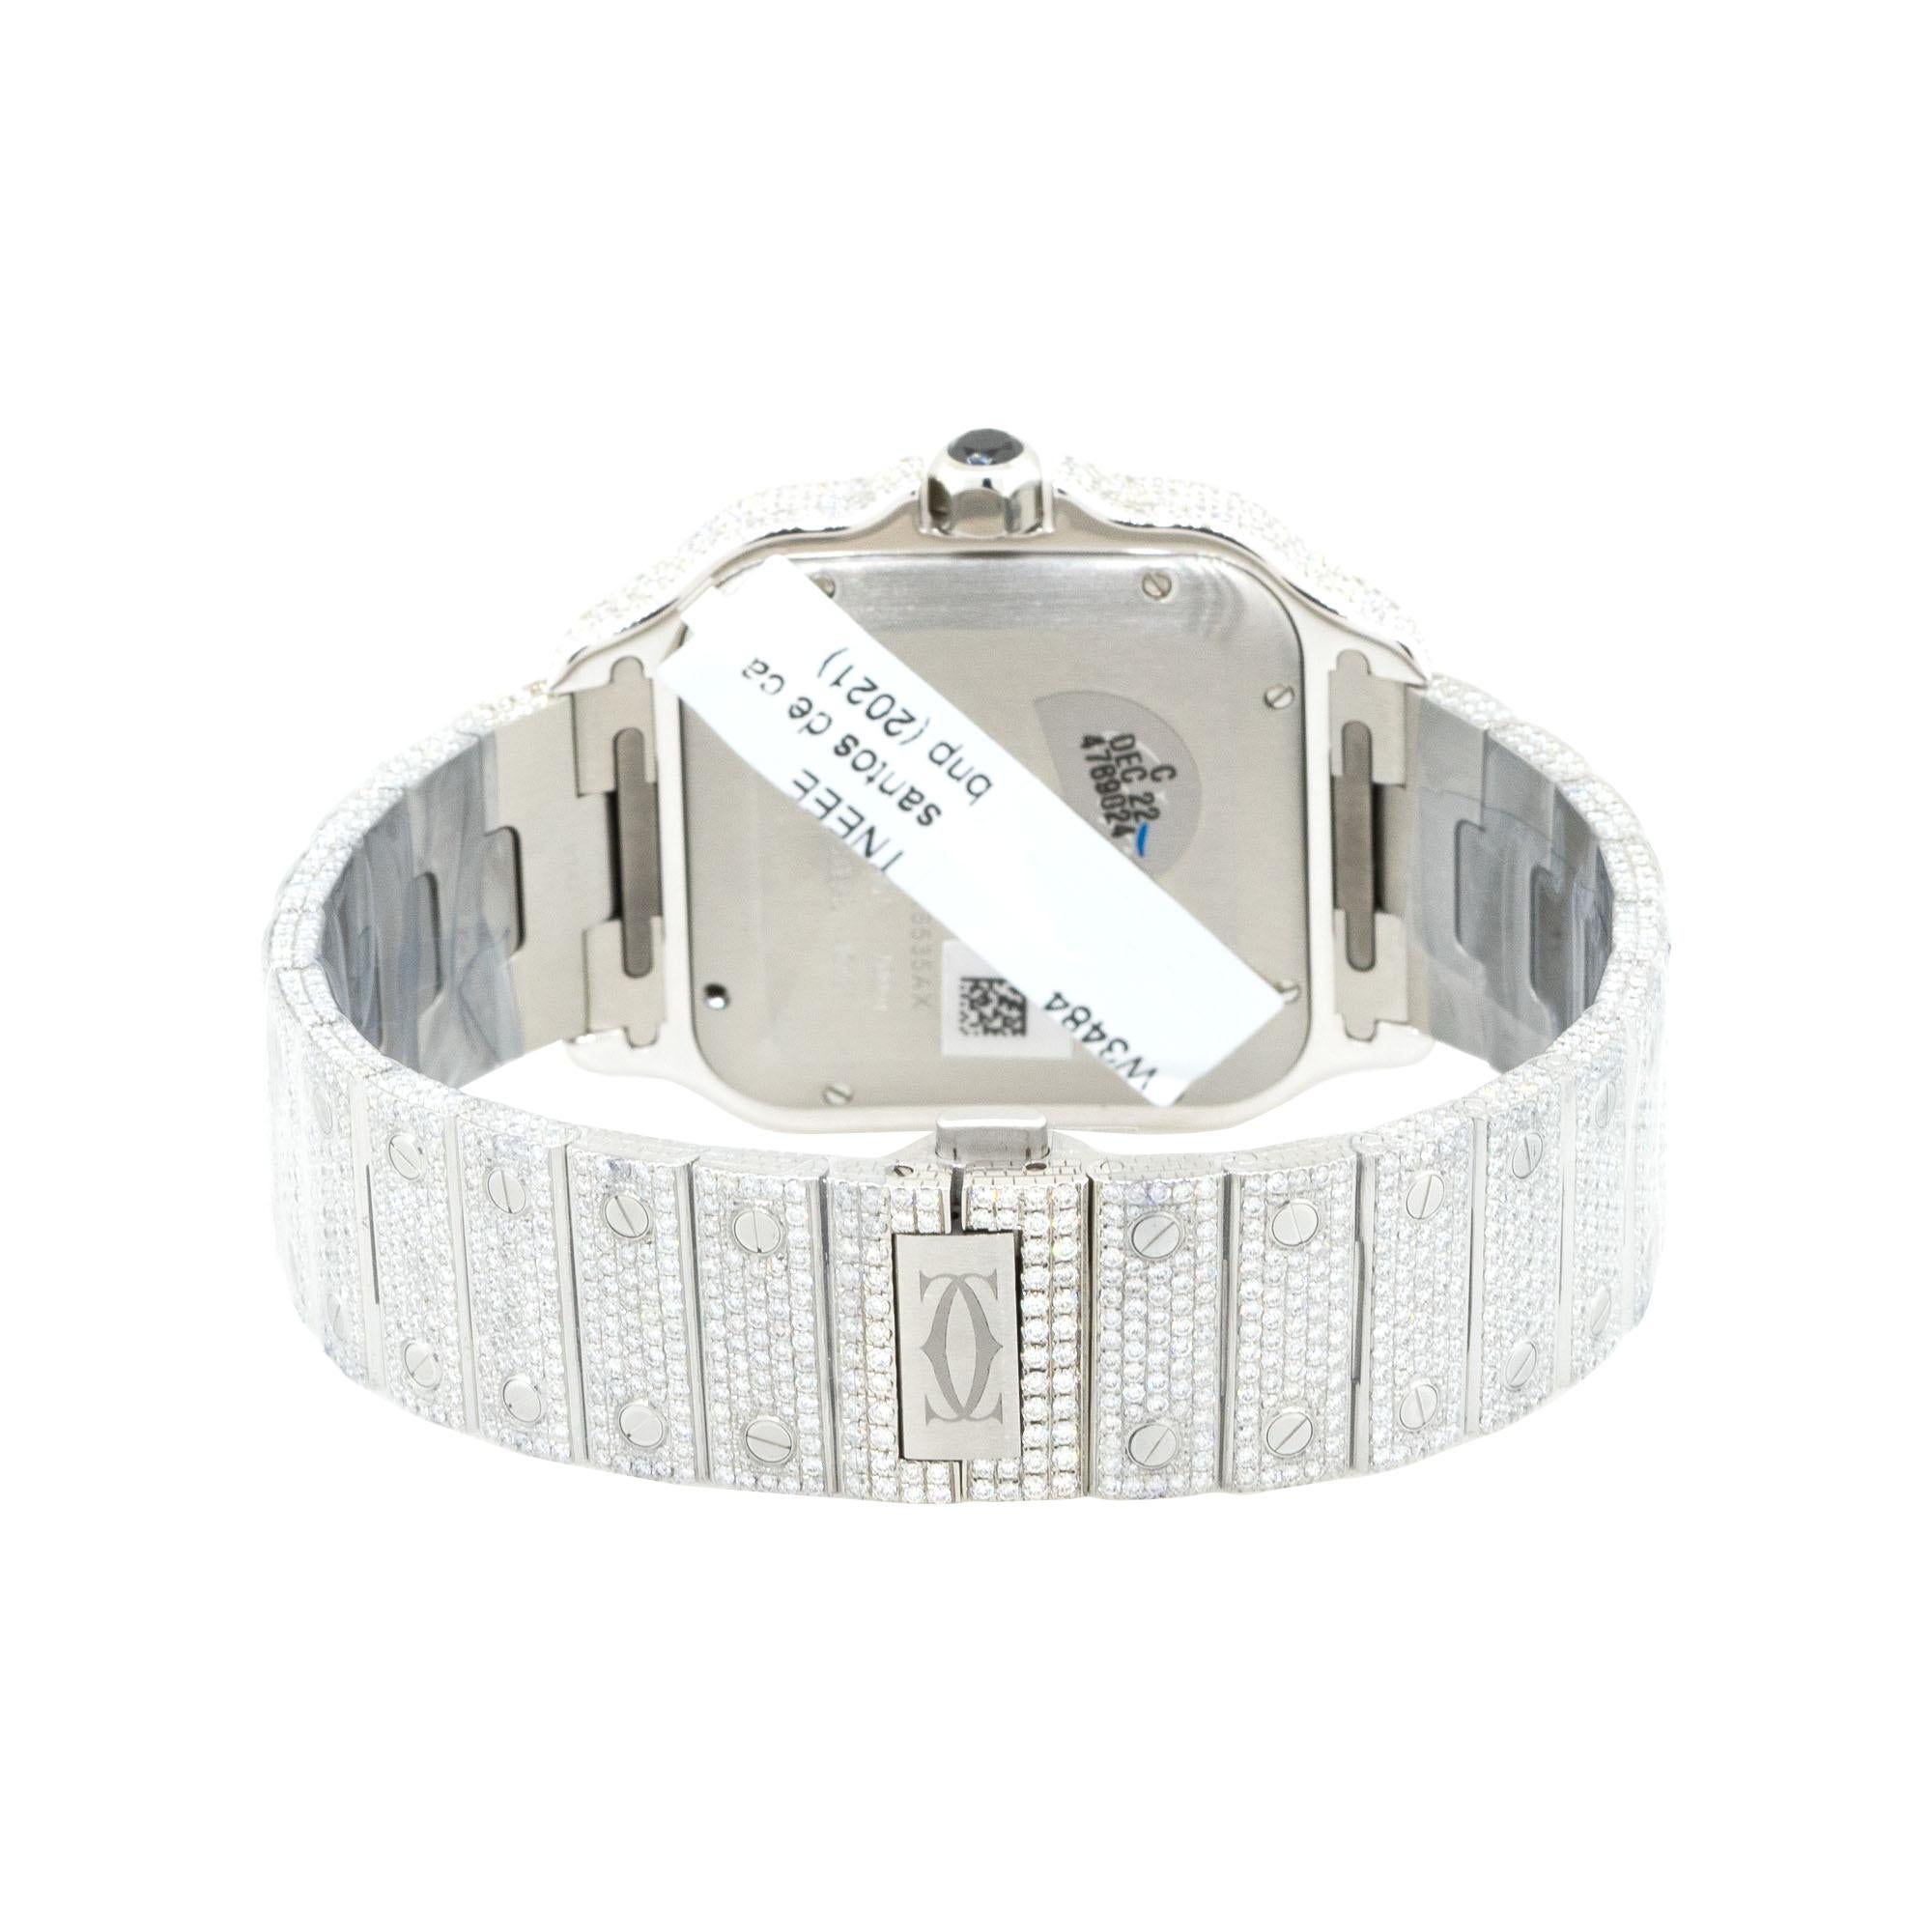 Round Cut Cartier Santos De Cartier Fully Iced Out Stainless Steel Watch